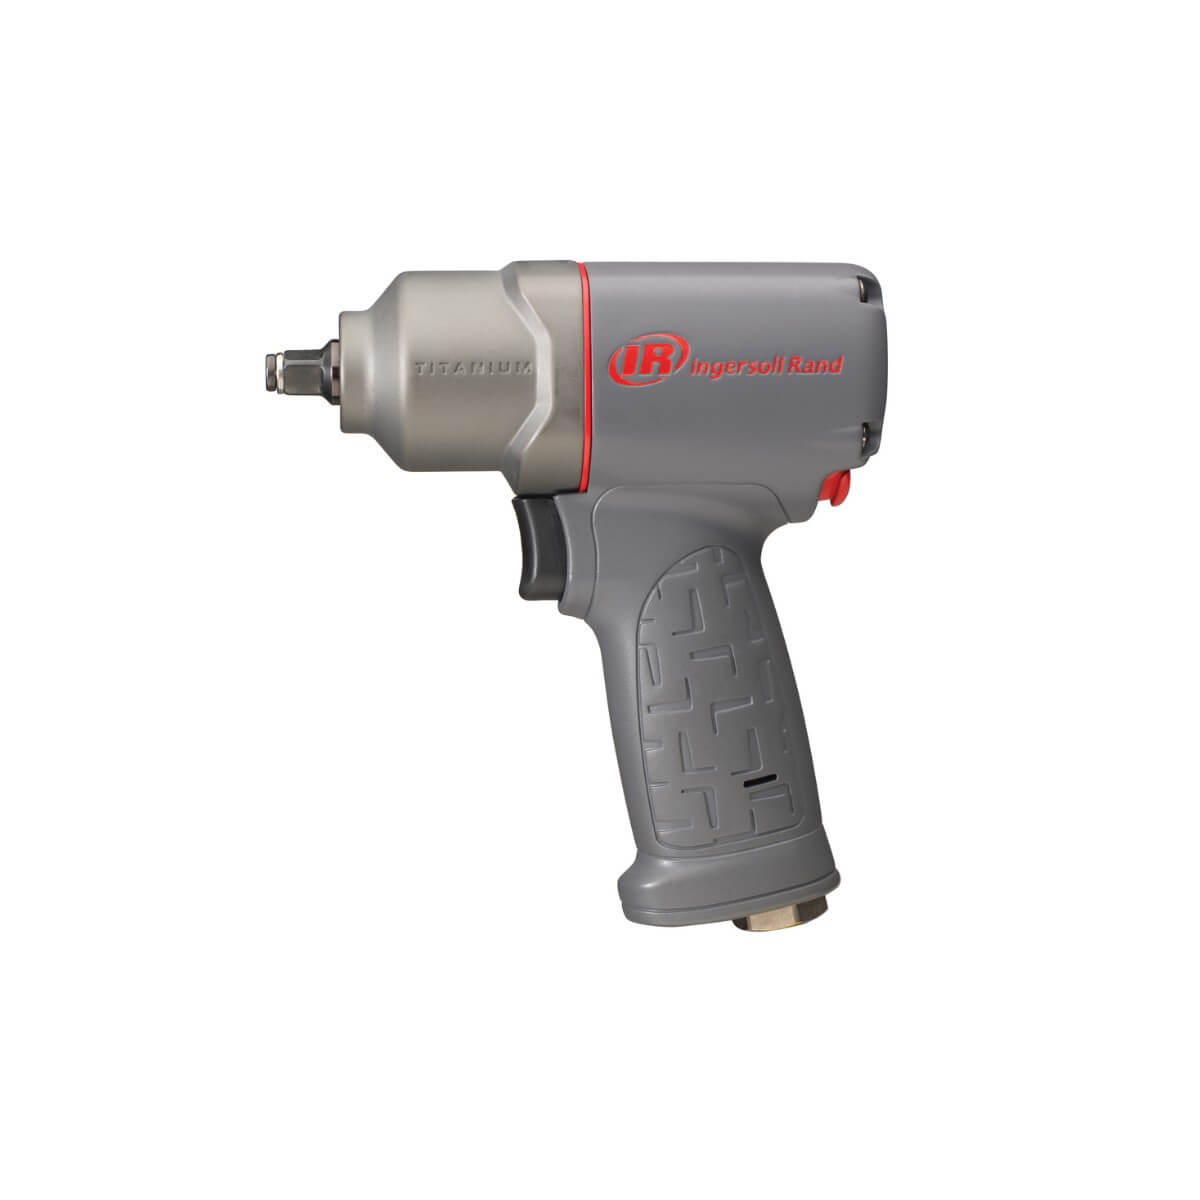 Ingersoll Rand 2115TIMAX - 3/8" Titanium Impact Wrench - wise-line-tools